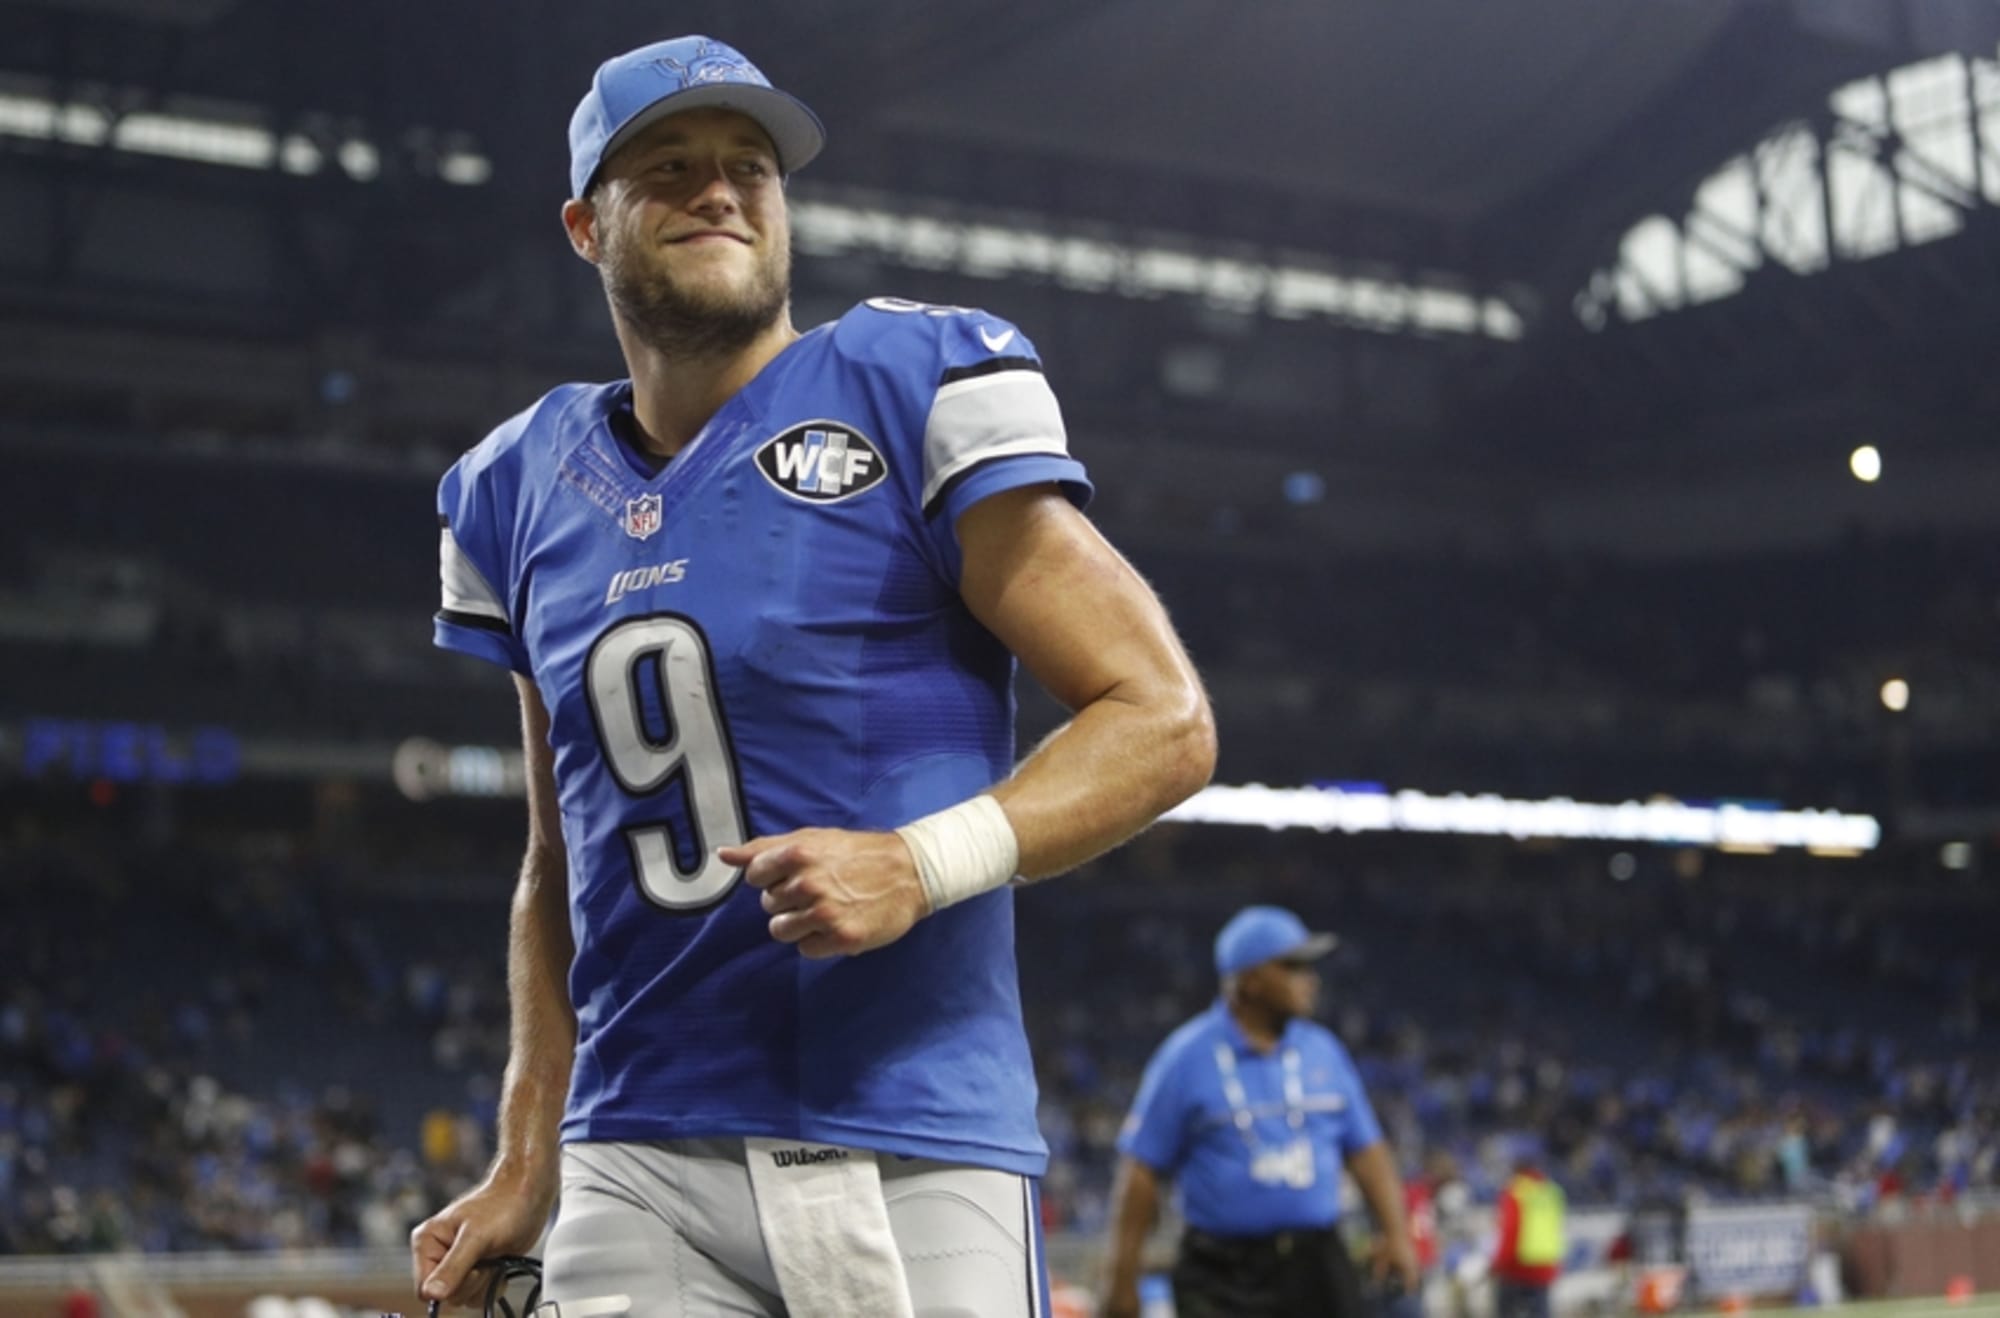 Lions King: Matthew Stafford Finally Playing to His Potential